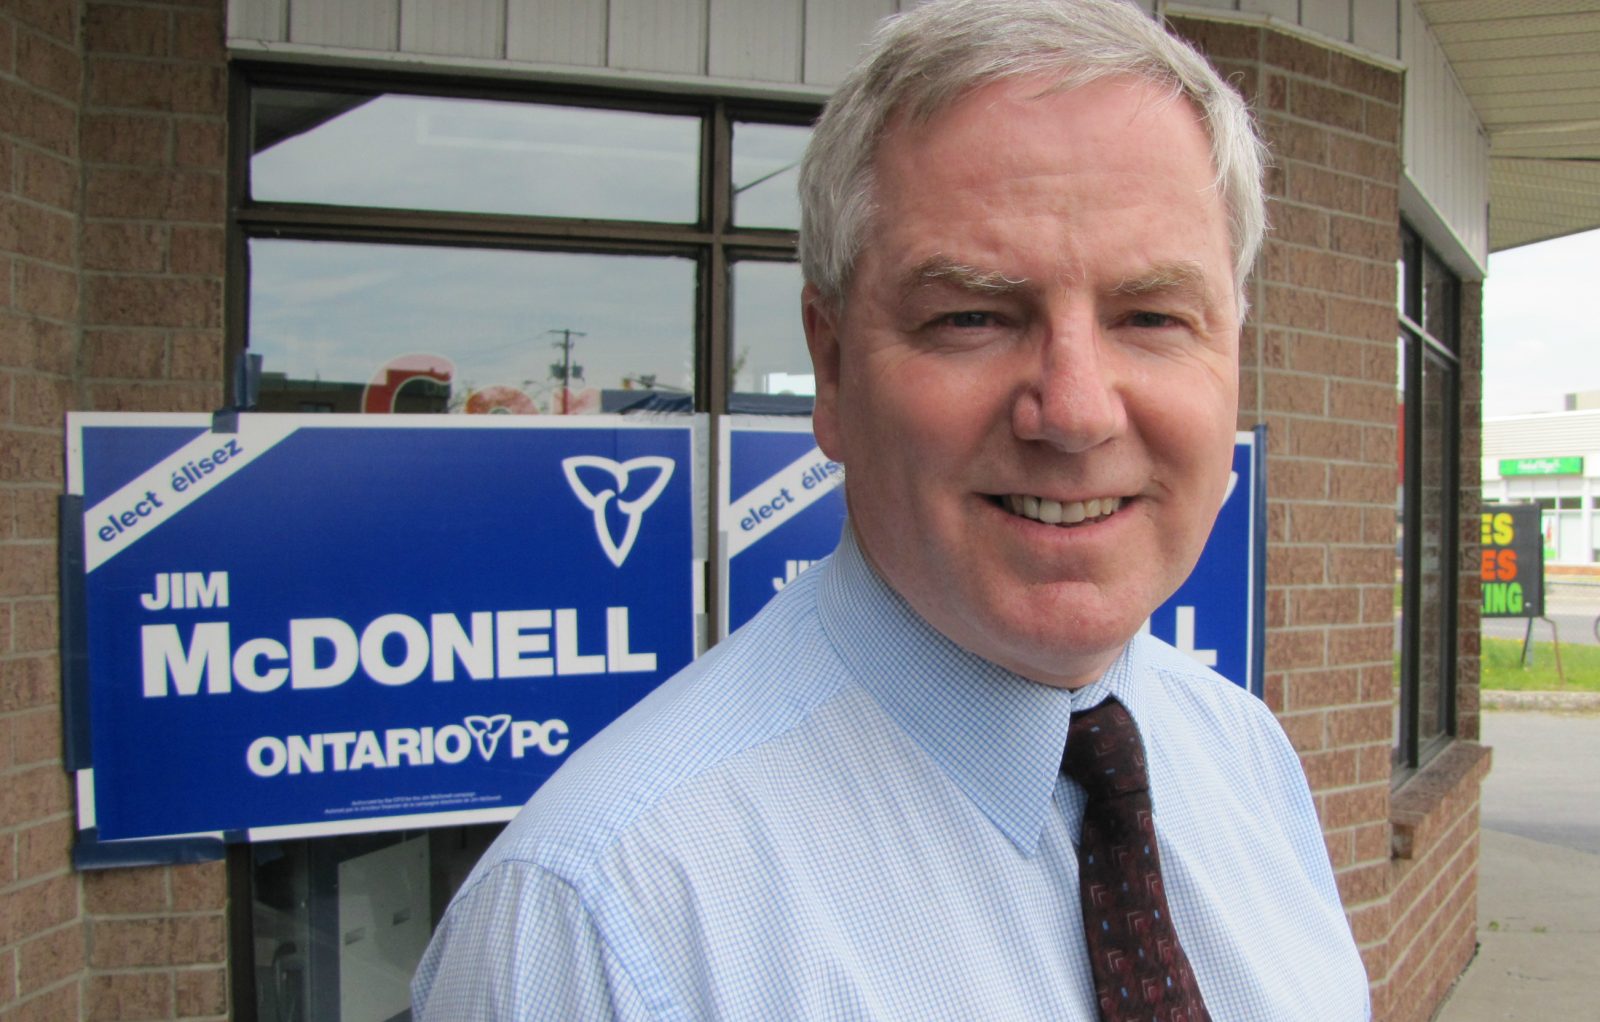 SD&SG MPP weighs in on state of PC Party